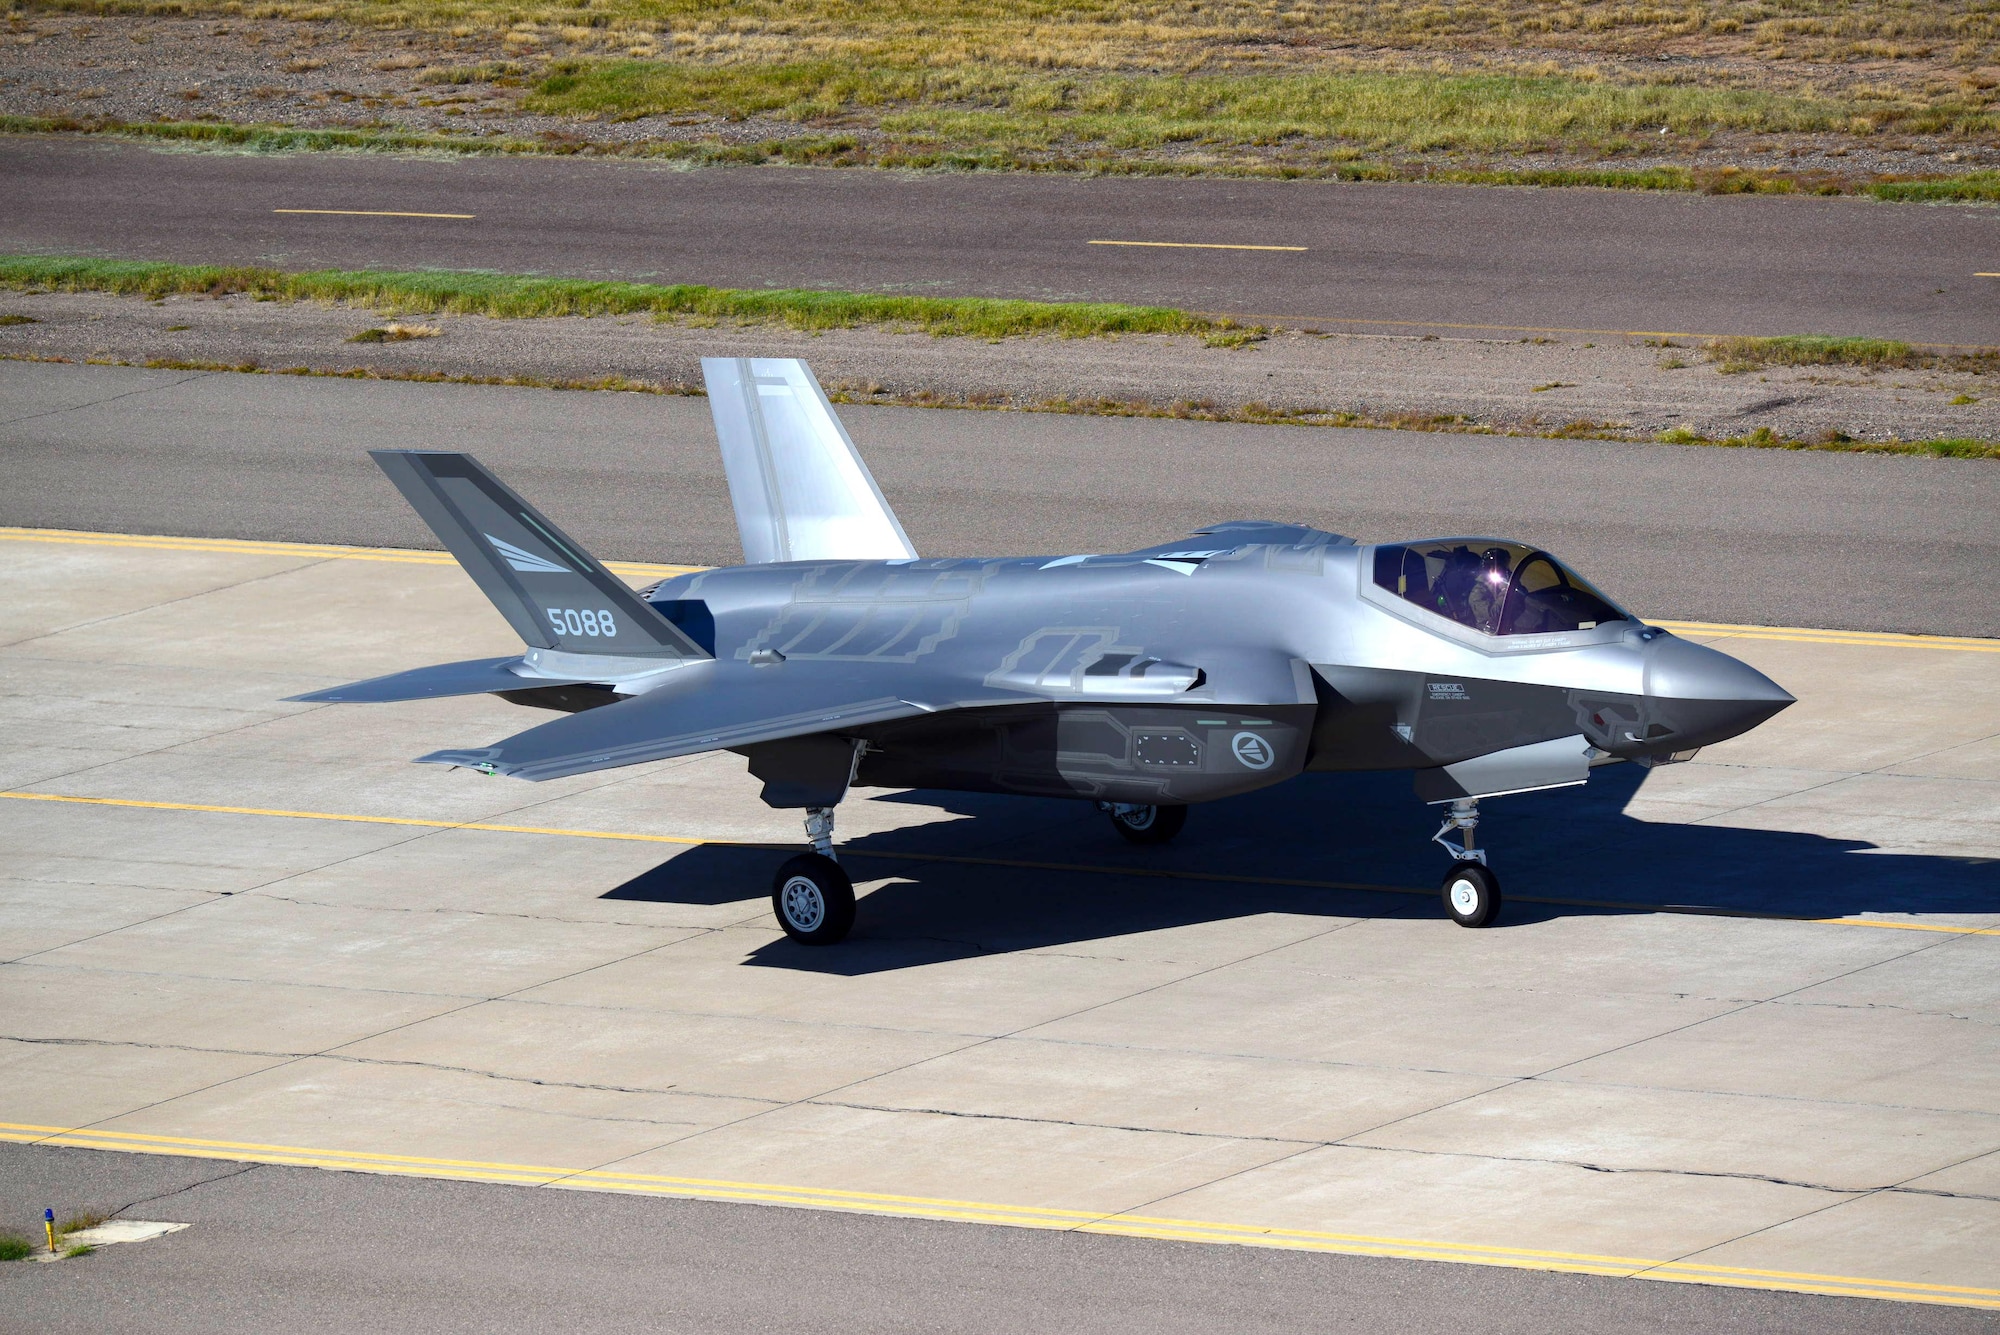 Norway’s first F-35 Lightning II taxis to the parking ramp Nov. 11, 2015, at Luke Air Force Base, Ariz. The first two Royal Norwegian Air Force F-35s arrived at Luke in conjunction with their air force birthday. (U.S. Air Force photo/Tech. Sgt. Timothy Boyer)